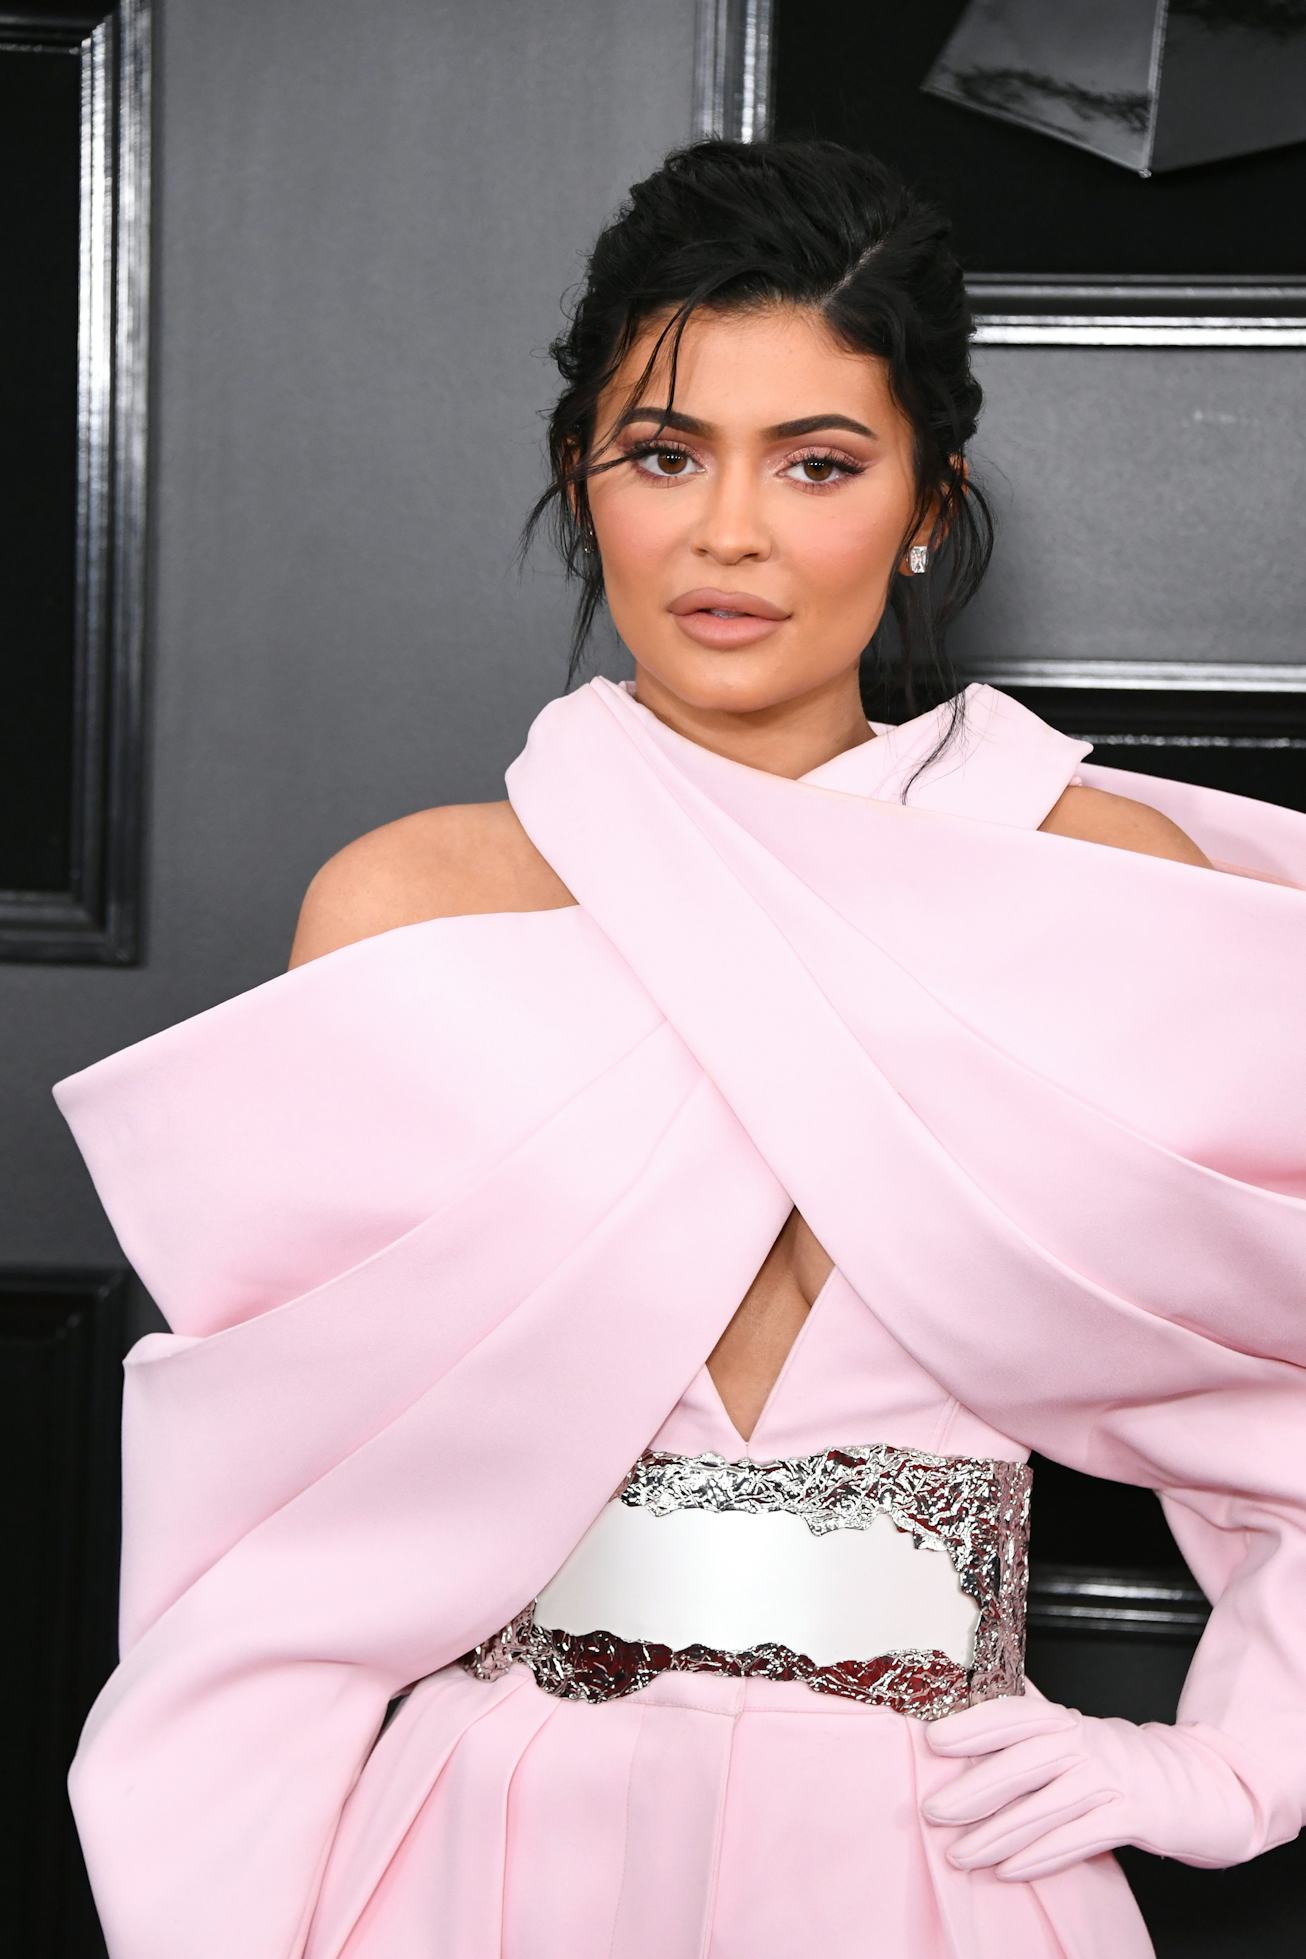 Kylie Jenner poses in a light pink outfit